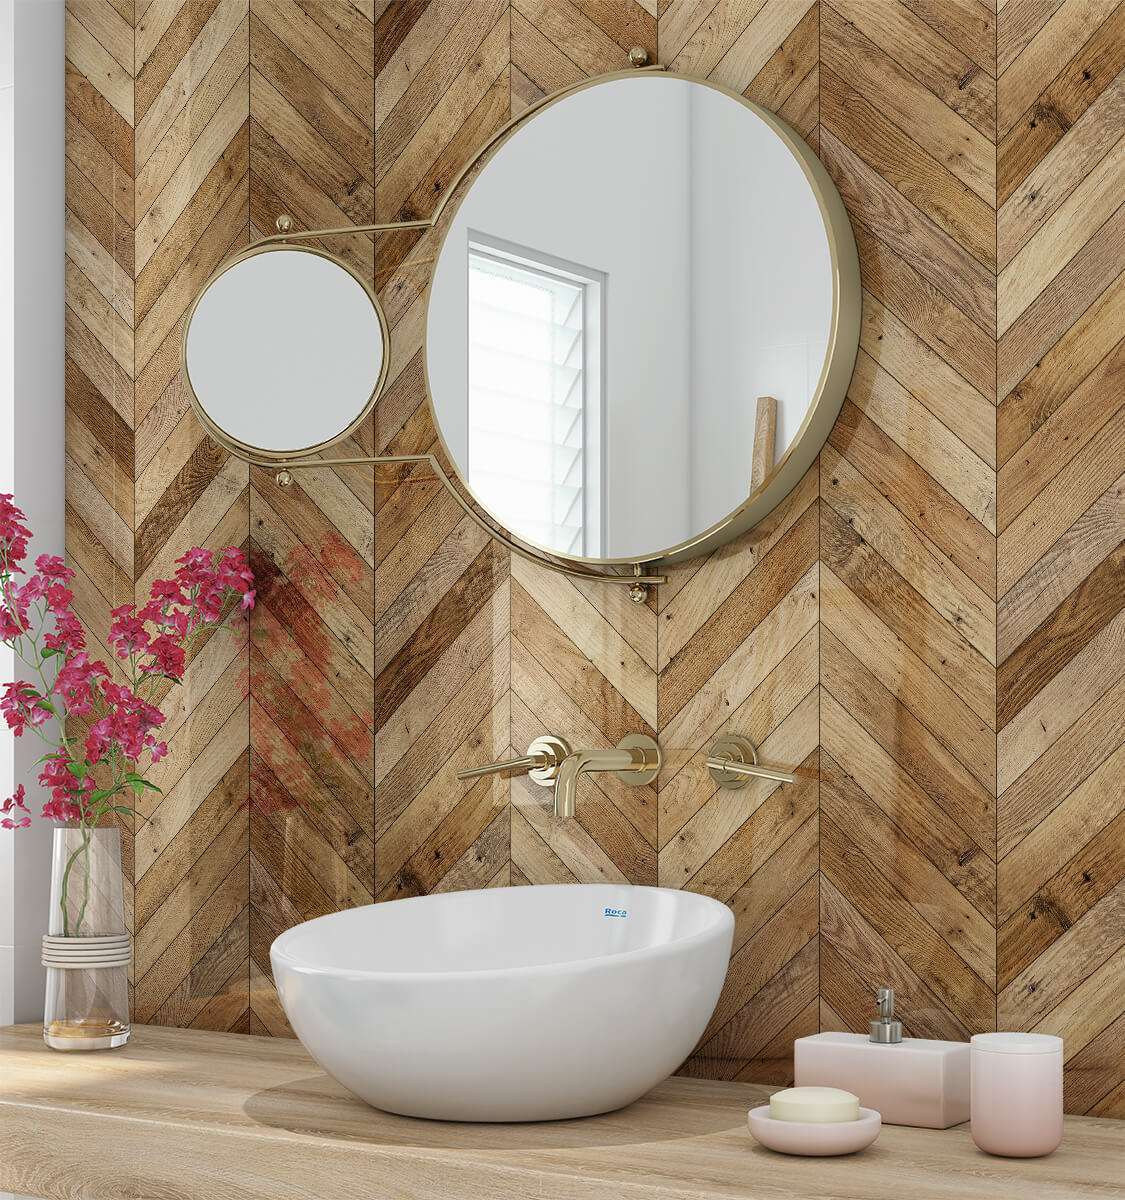 Bathroom With Wooden Decorative wall panels